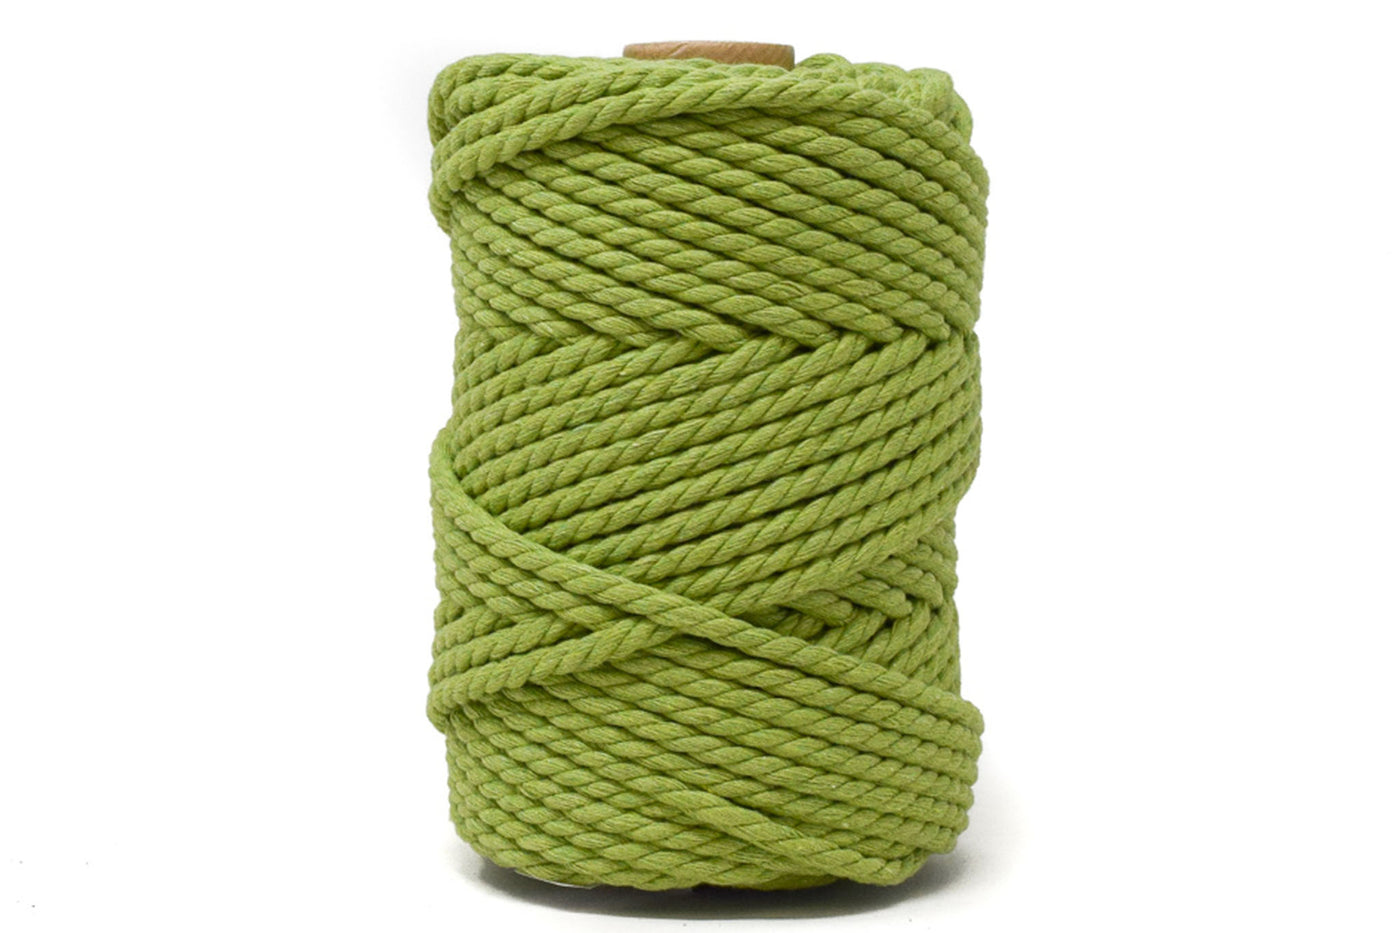 COTTON ROPE ZERO WASTE 5 MM - 3 PLY - APPLE GREEN COLOR